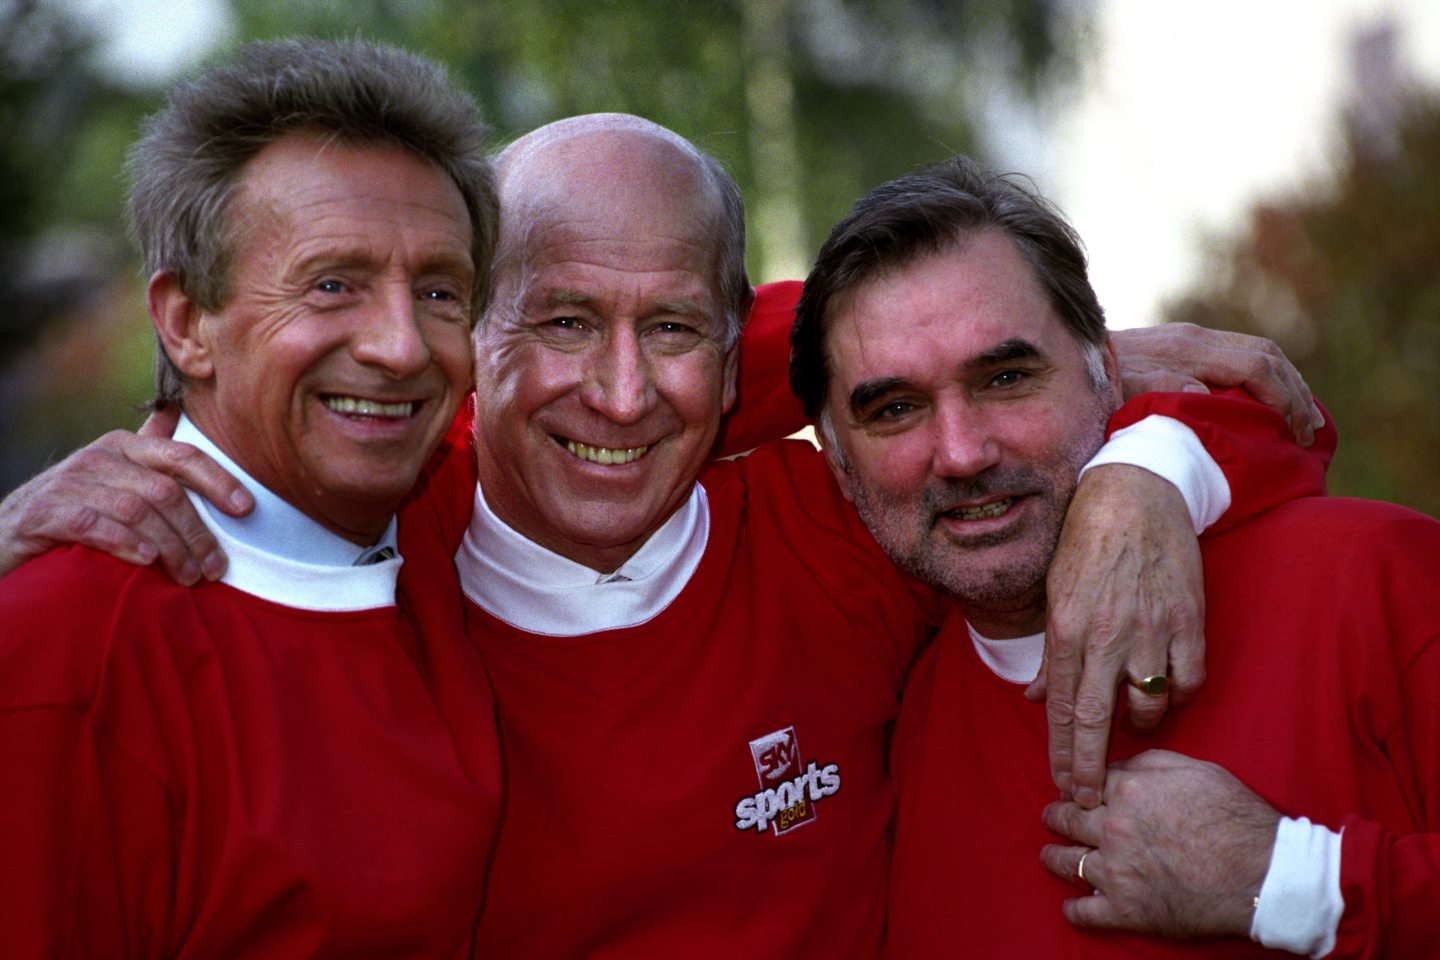 Denis Law, Bobby Charlton and George Best.